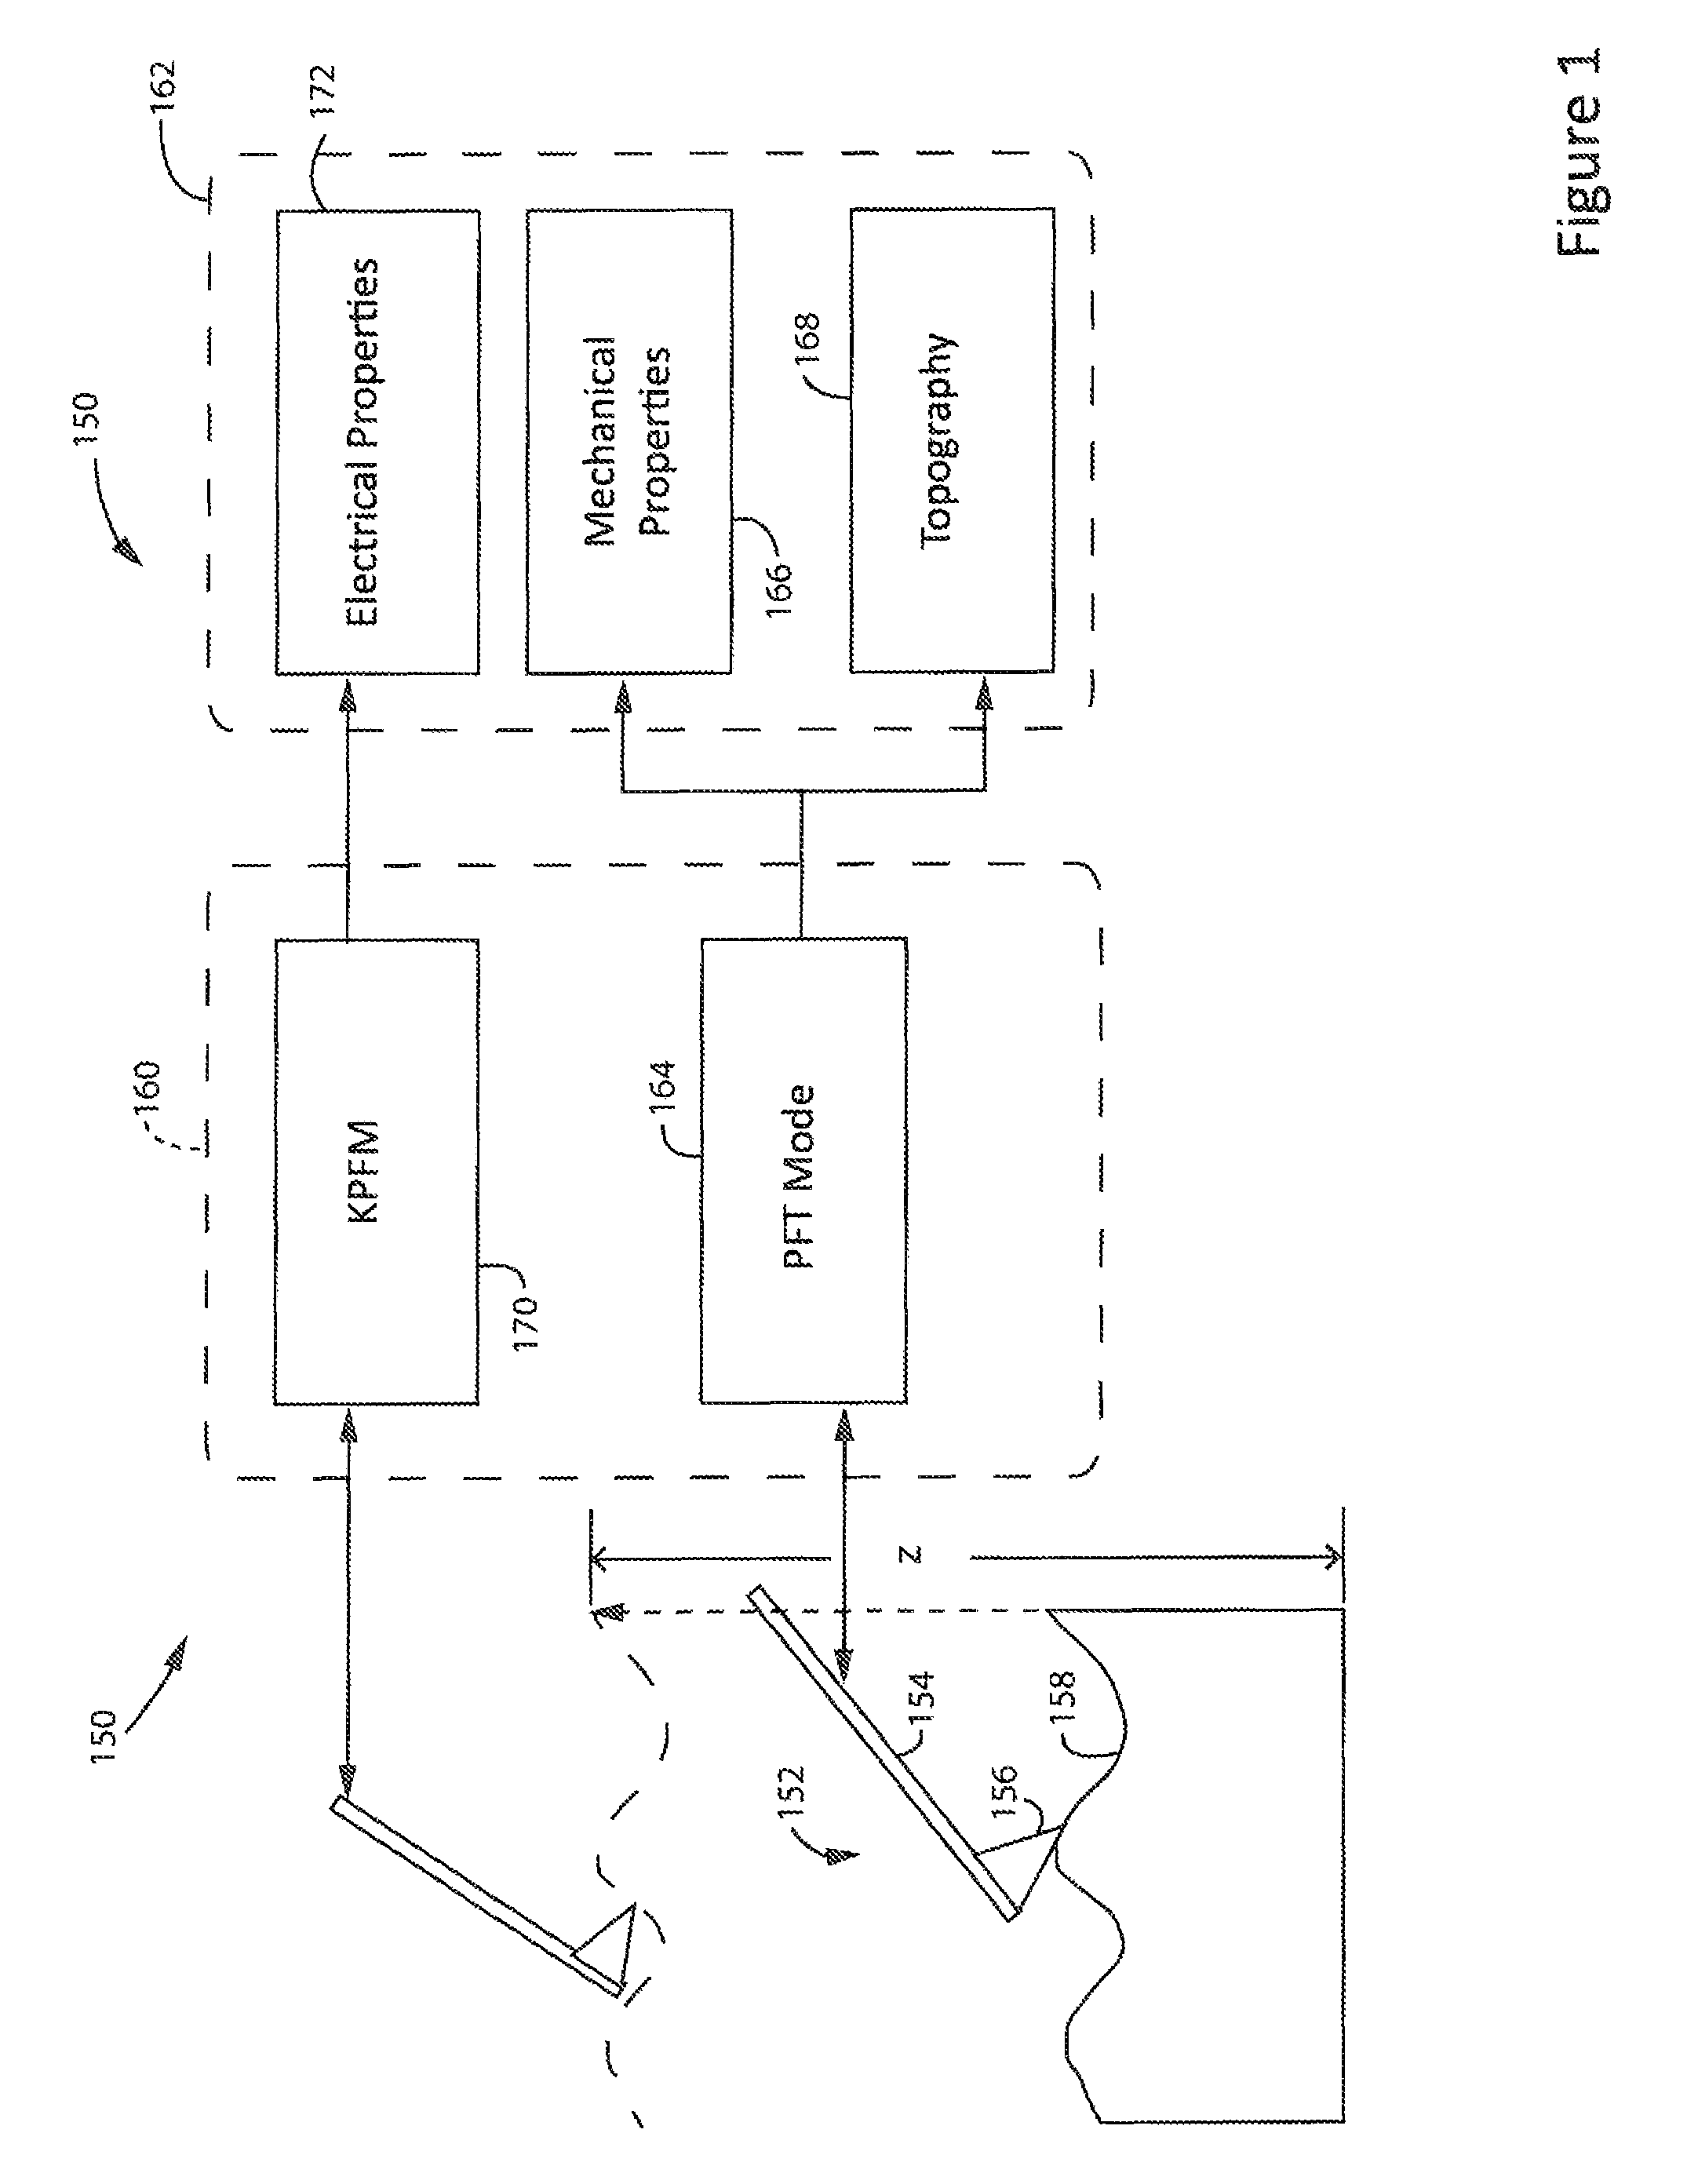 Method and apparatus of electrical property measurement using an AFM operating in peak force tapping mode